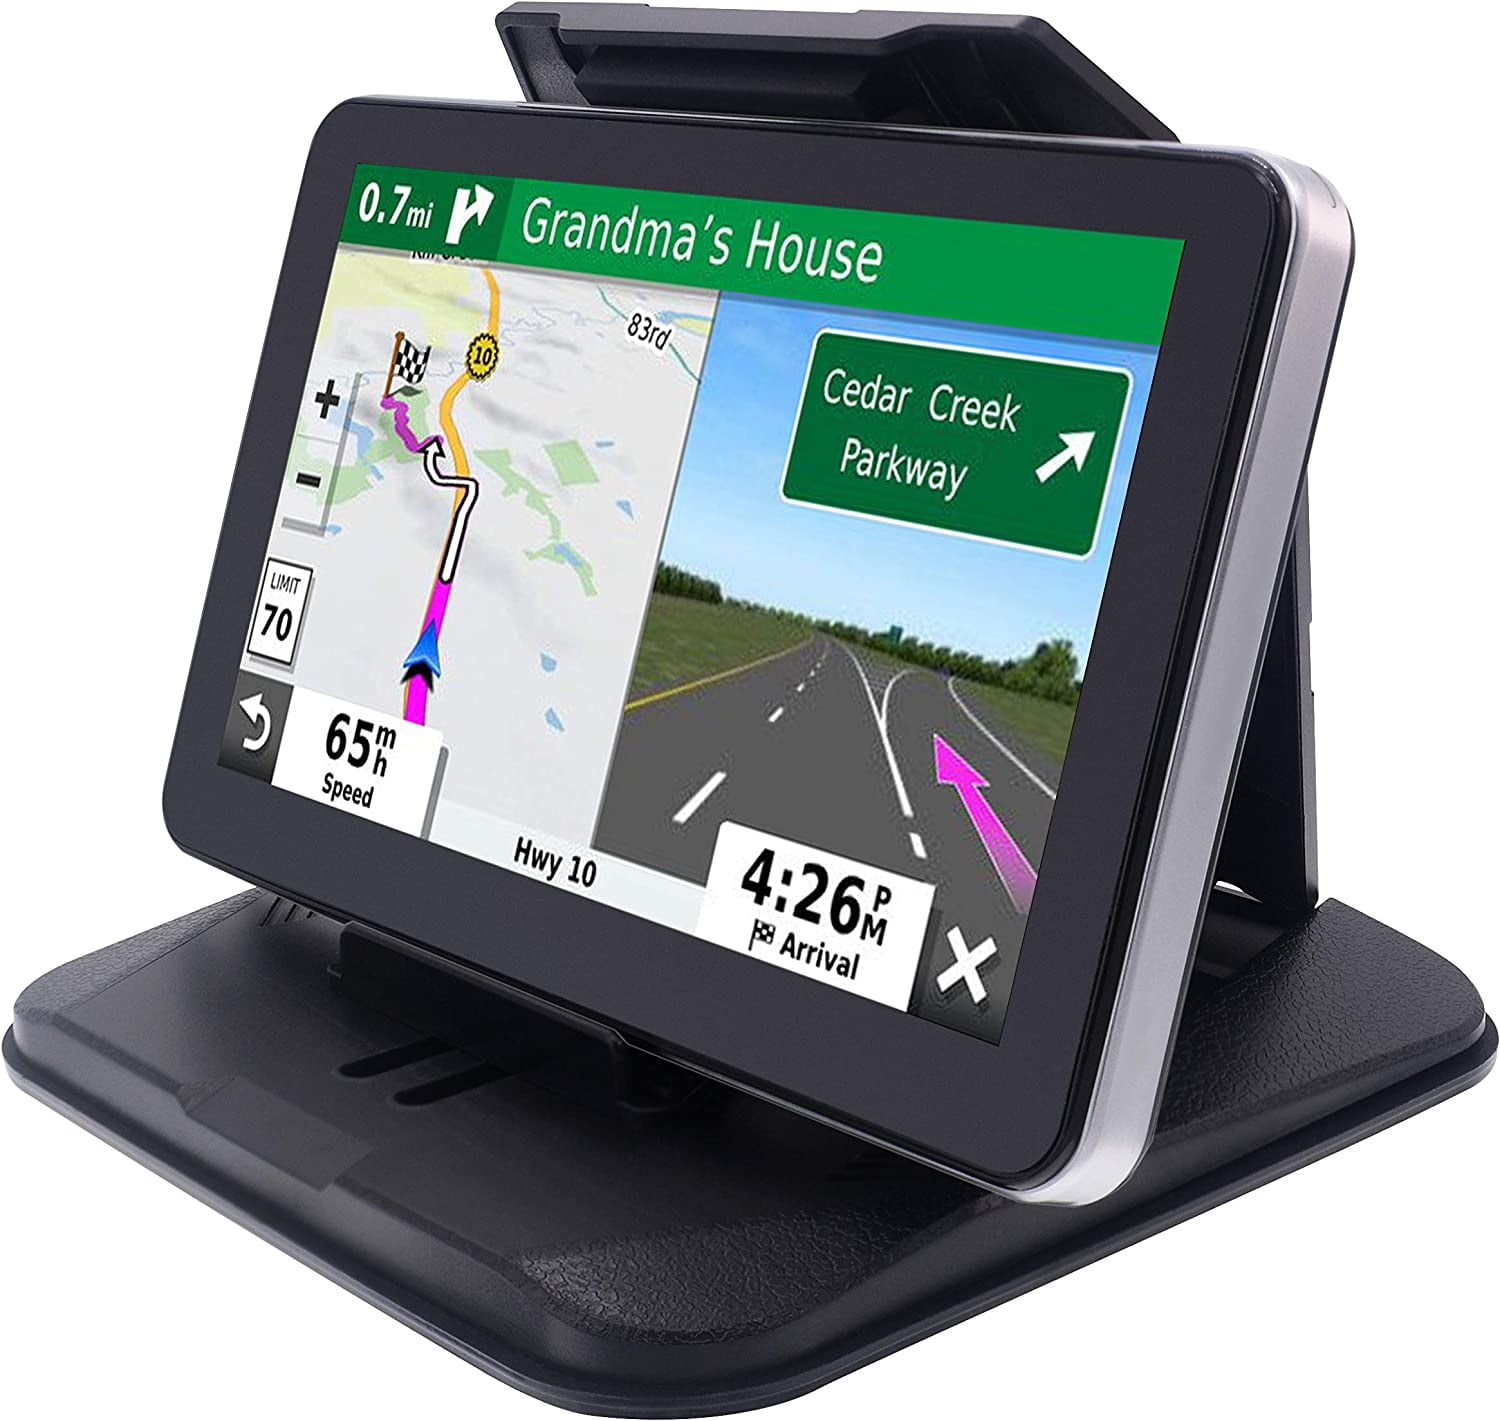 iSaddle Dashboard GPS Mount Holder - Universal Dashbaord Phone Tablet PC Navigation Holder for Garmin Nuvi Tomtom iPhone iPad Galaxy Yoga Android Fits 4.3"-9.6" & Smartphone Friction Mount Holder - Walmart.com